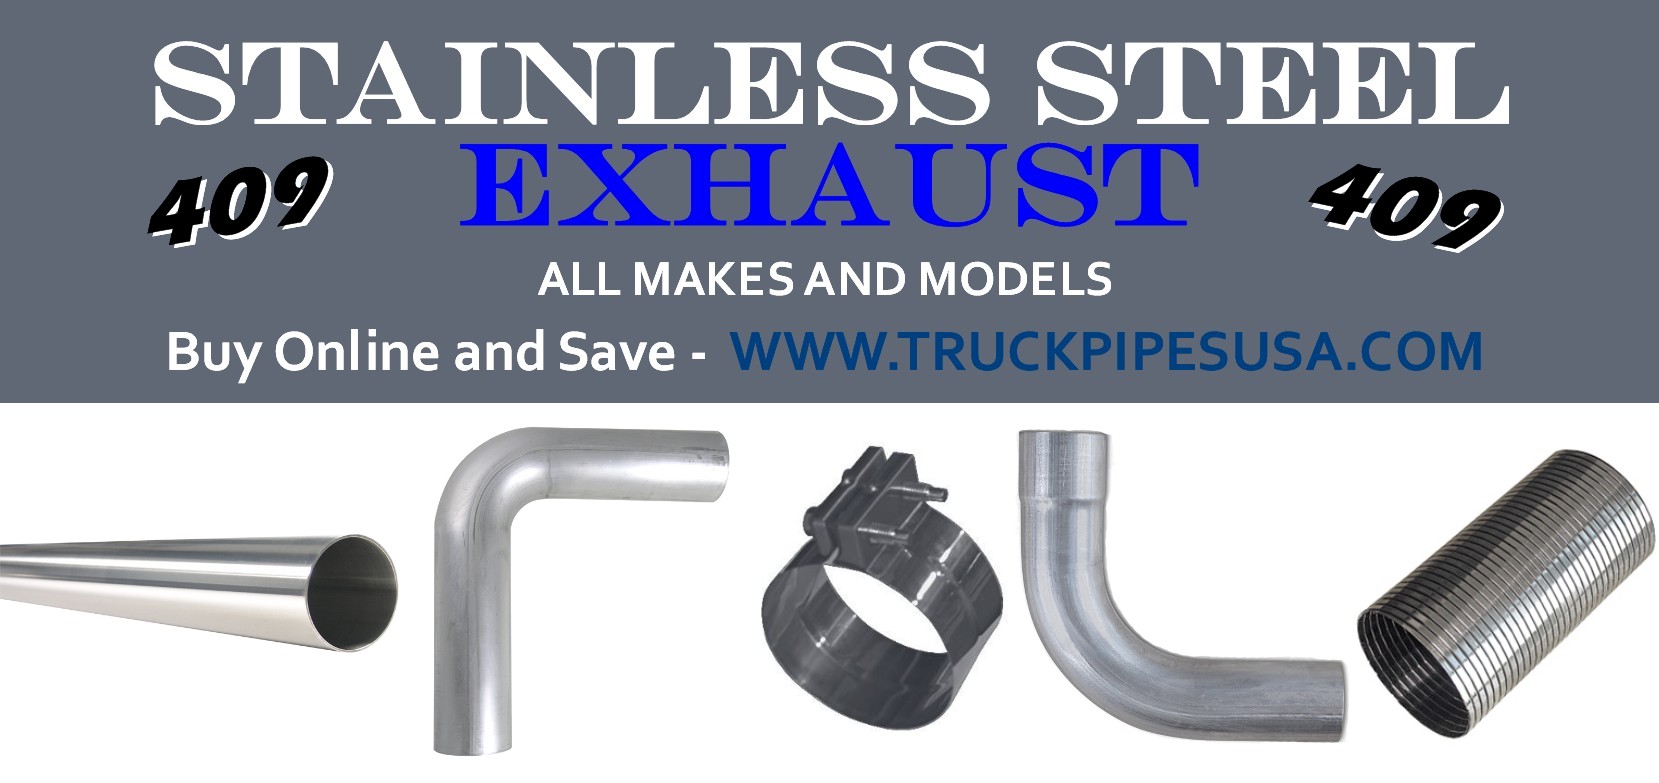 409-stainless-steel-exhaust-pipes-for-big-rig-trucks-from-truckpipesusa.jpg